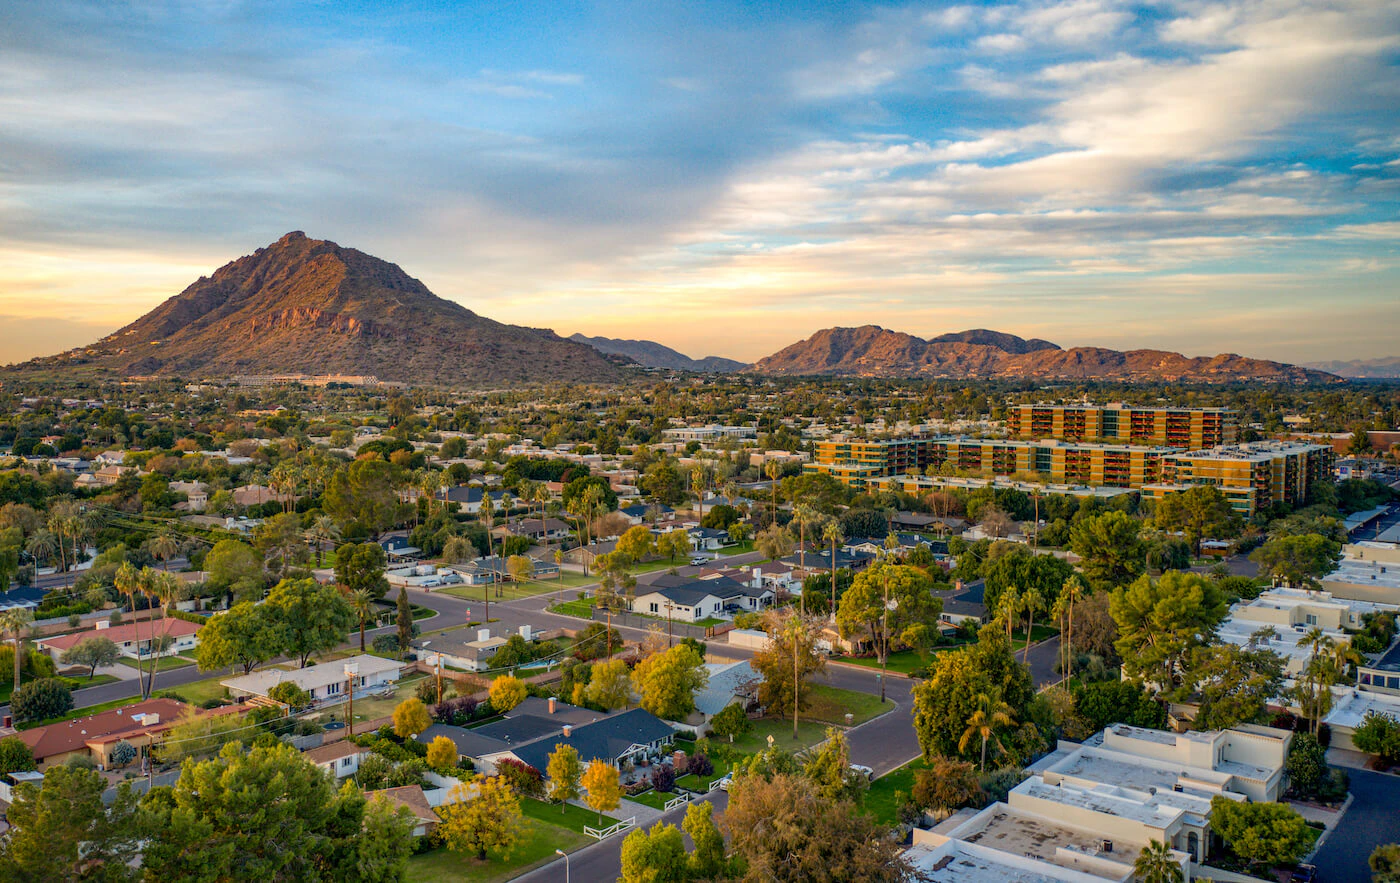 Scottsdale, Arizona, is among the cities ranked best places to raise a family. Image via Shutterstock